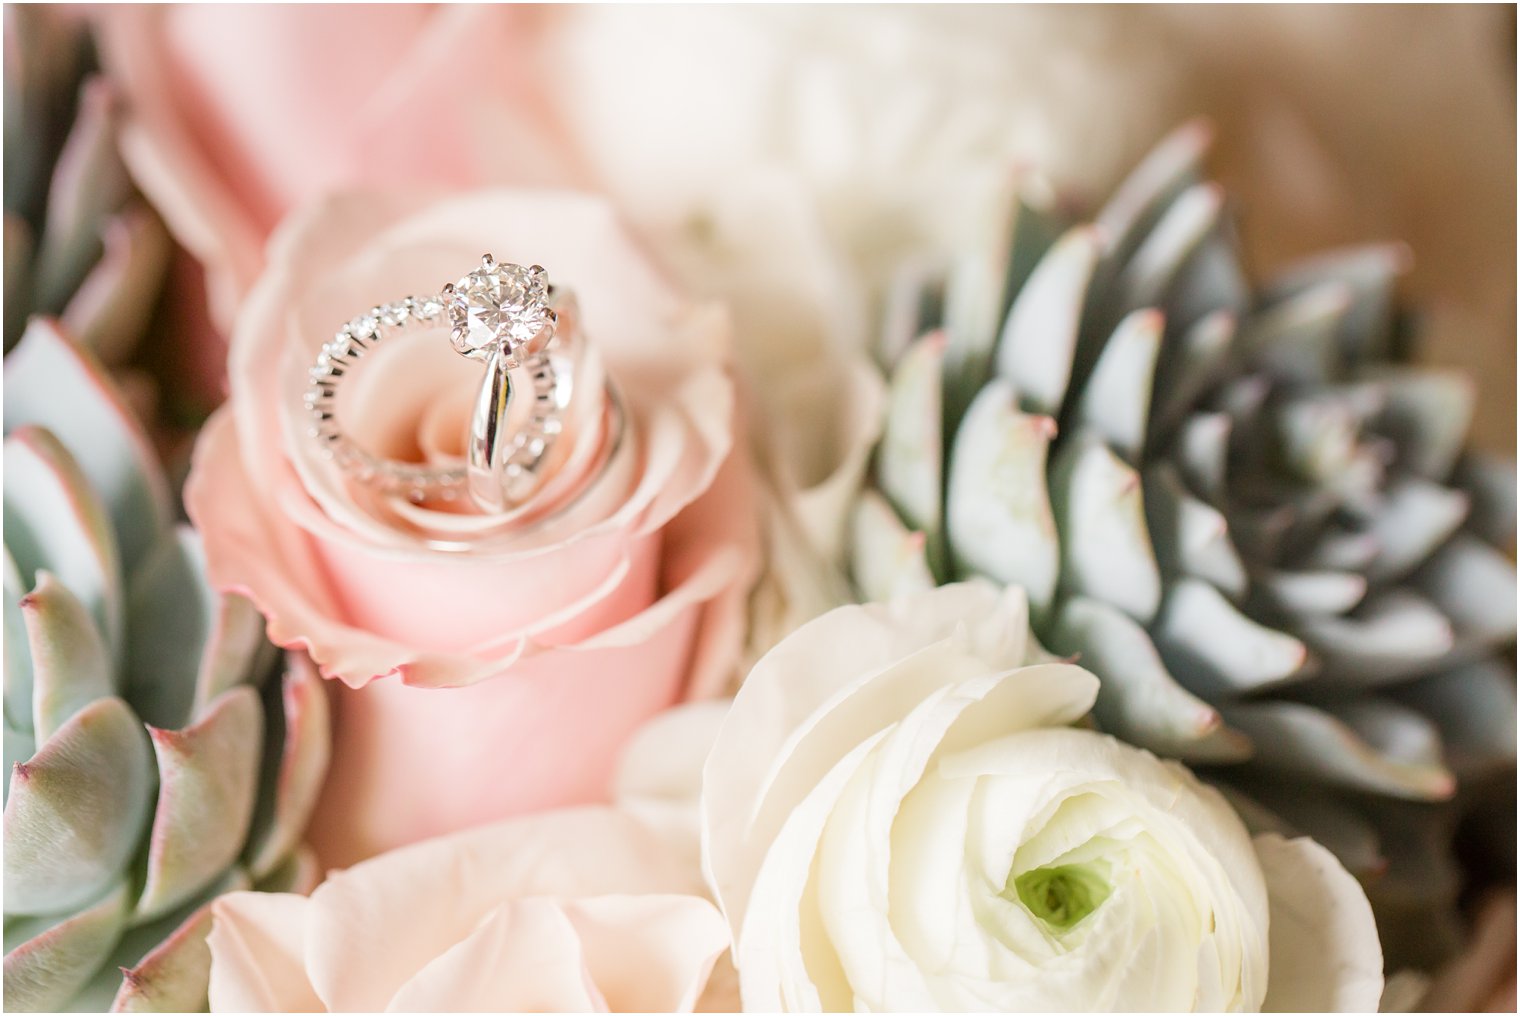 Engagement ring in bouquet by Bloomers 'n Things (Debbie Personette) | Photos by Idalia Photography